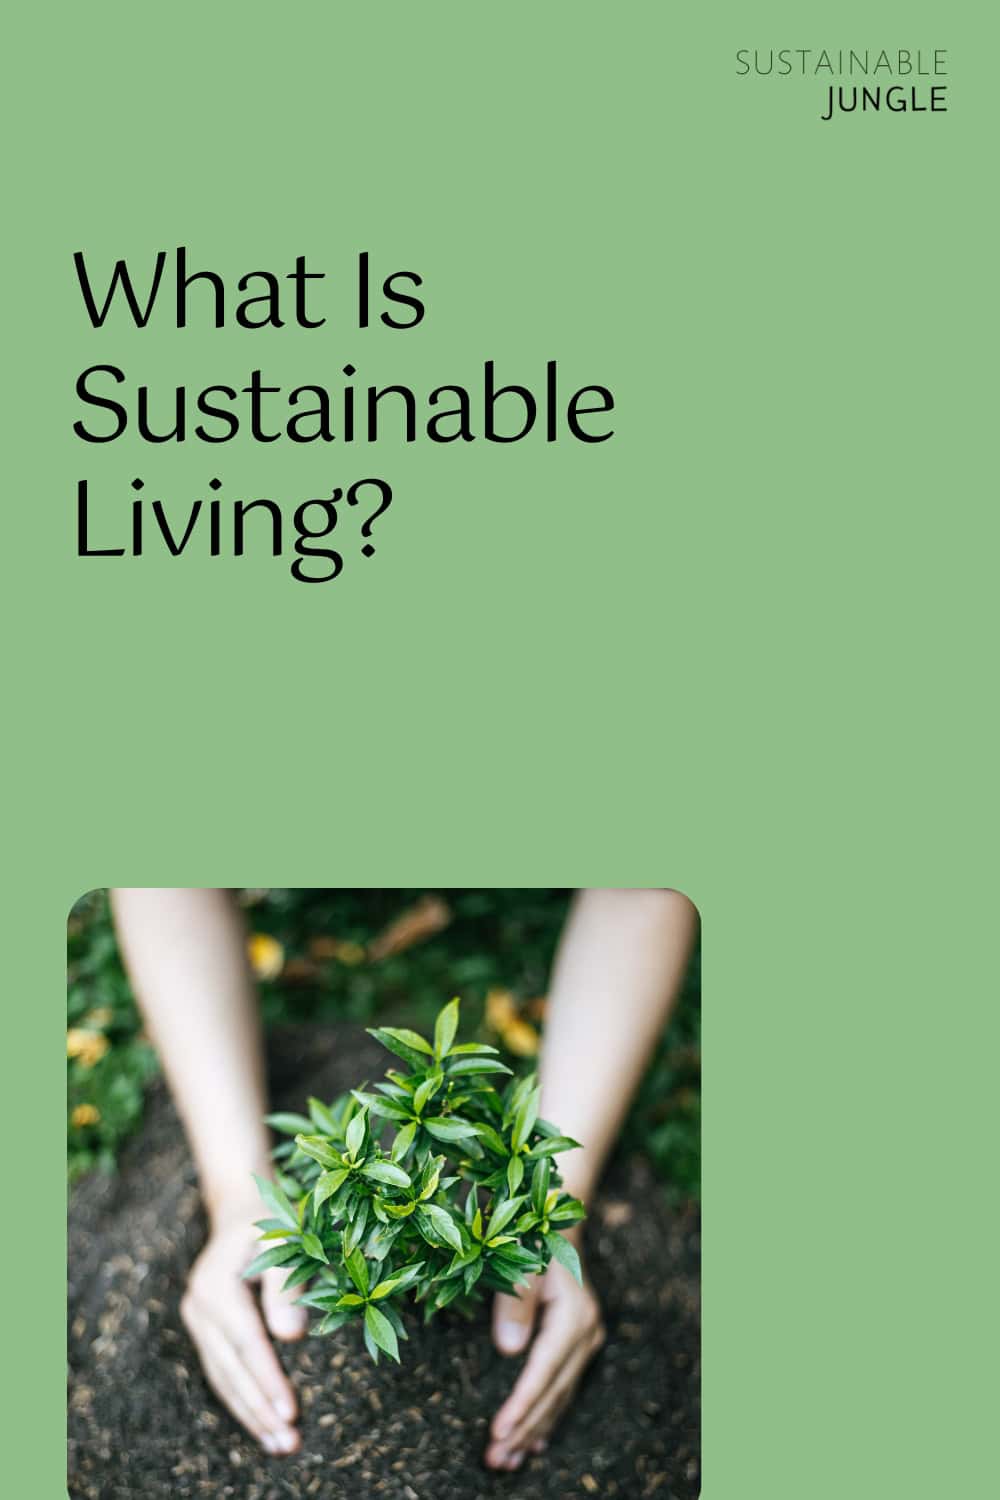 What Is Sustainable Living? Image by Salang889 #whatissustainableliving #sustainablelivingmeaning #sustainablelivingdefinition #sustainablelivingpractices #definitionofsustainableliving #sustainablejungle